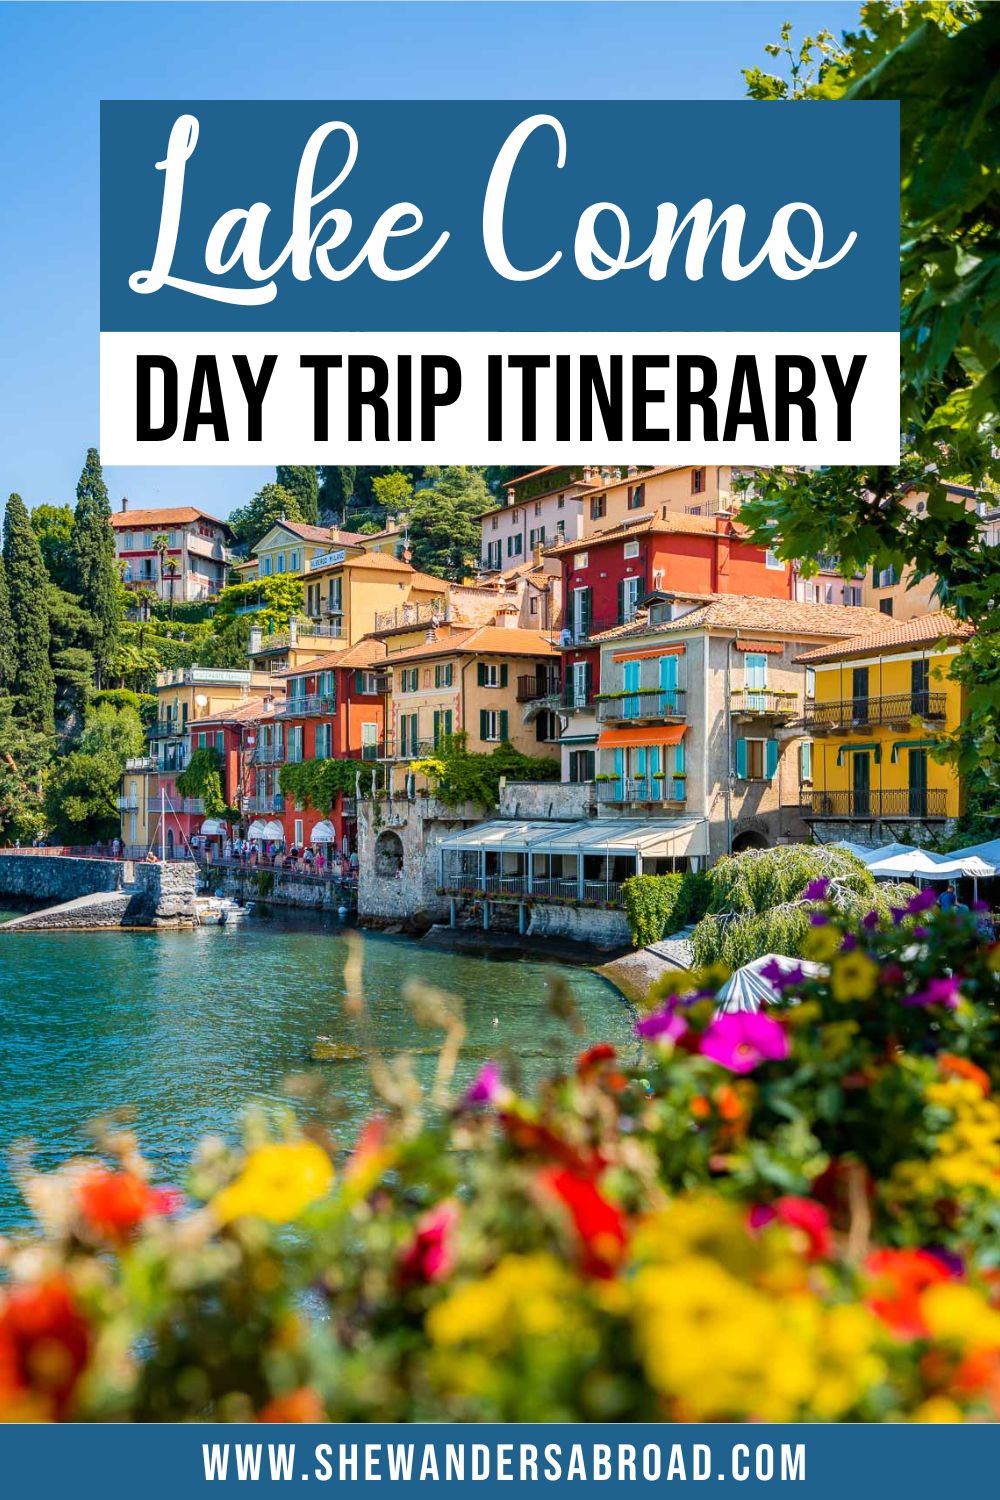 Day Trip to Lake Como from Milan: The Best Lake Como One Day Itinerary